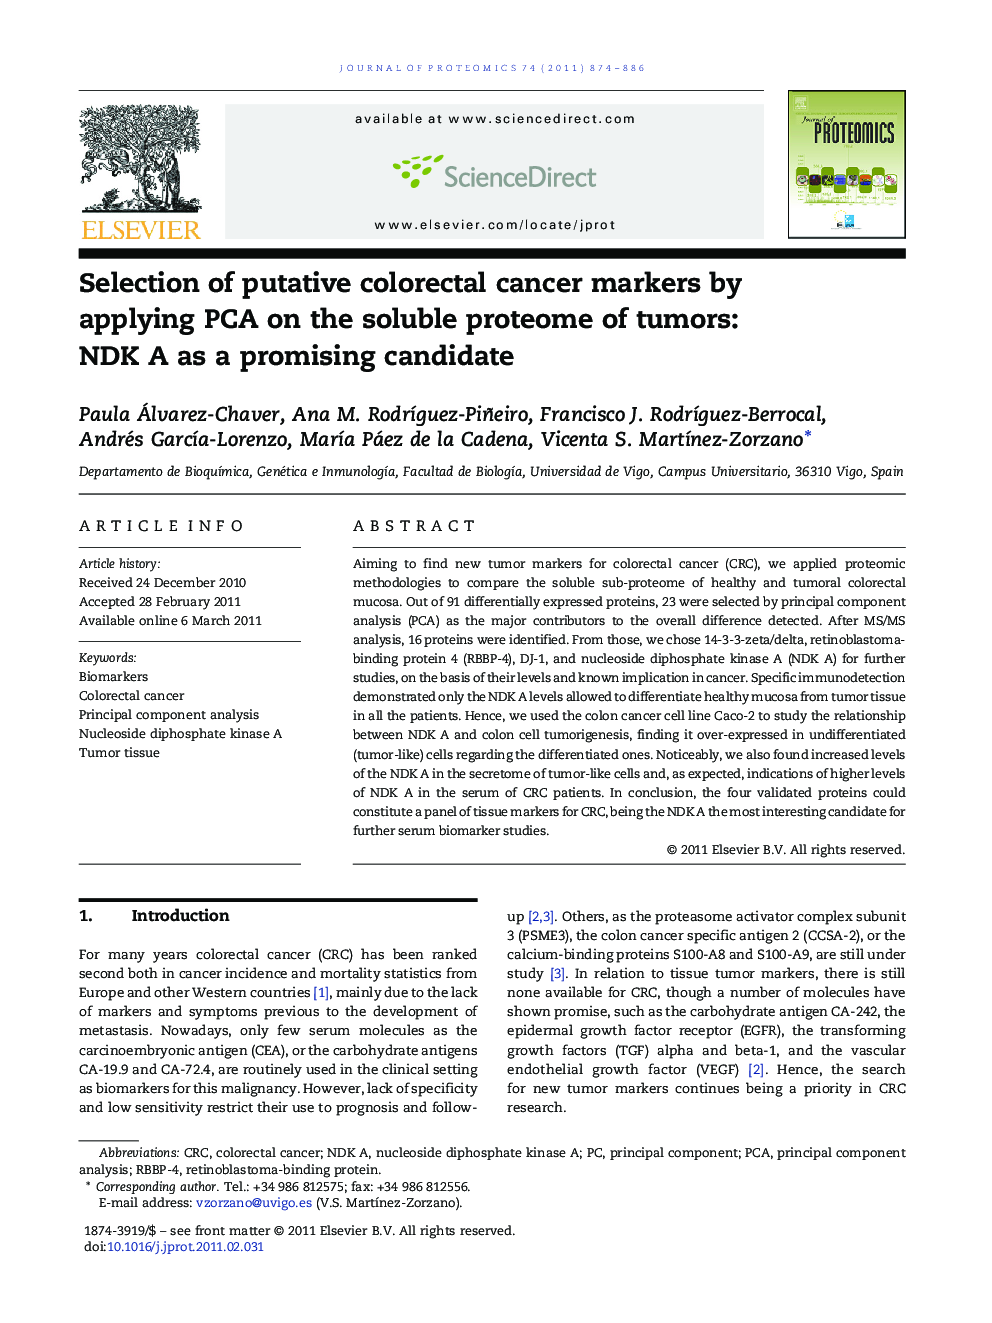 Selection of putative colorectal cancer markers by applying PCA on the soluble proteome of tumors: NDK A as a promising candidate